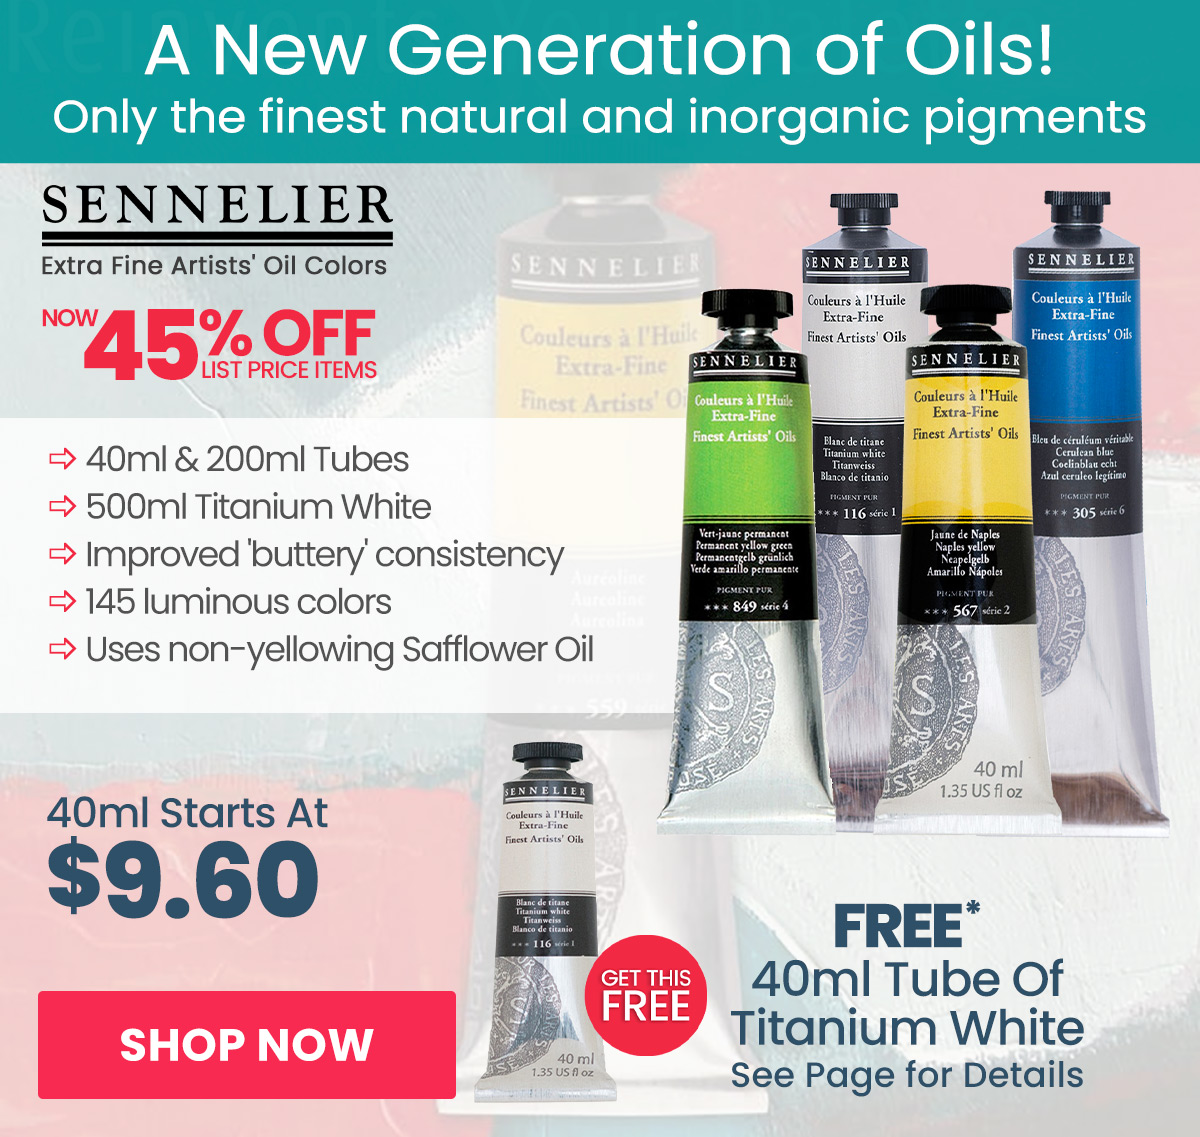 Sennelier Extra Fine Artists' Oil Colors - FREE Gift with Purchase